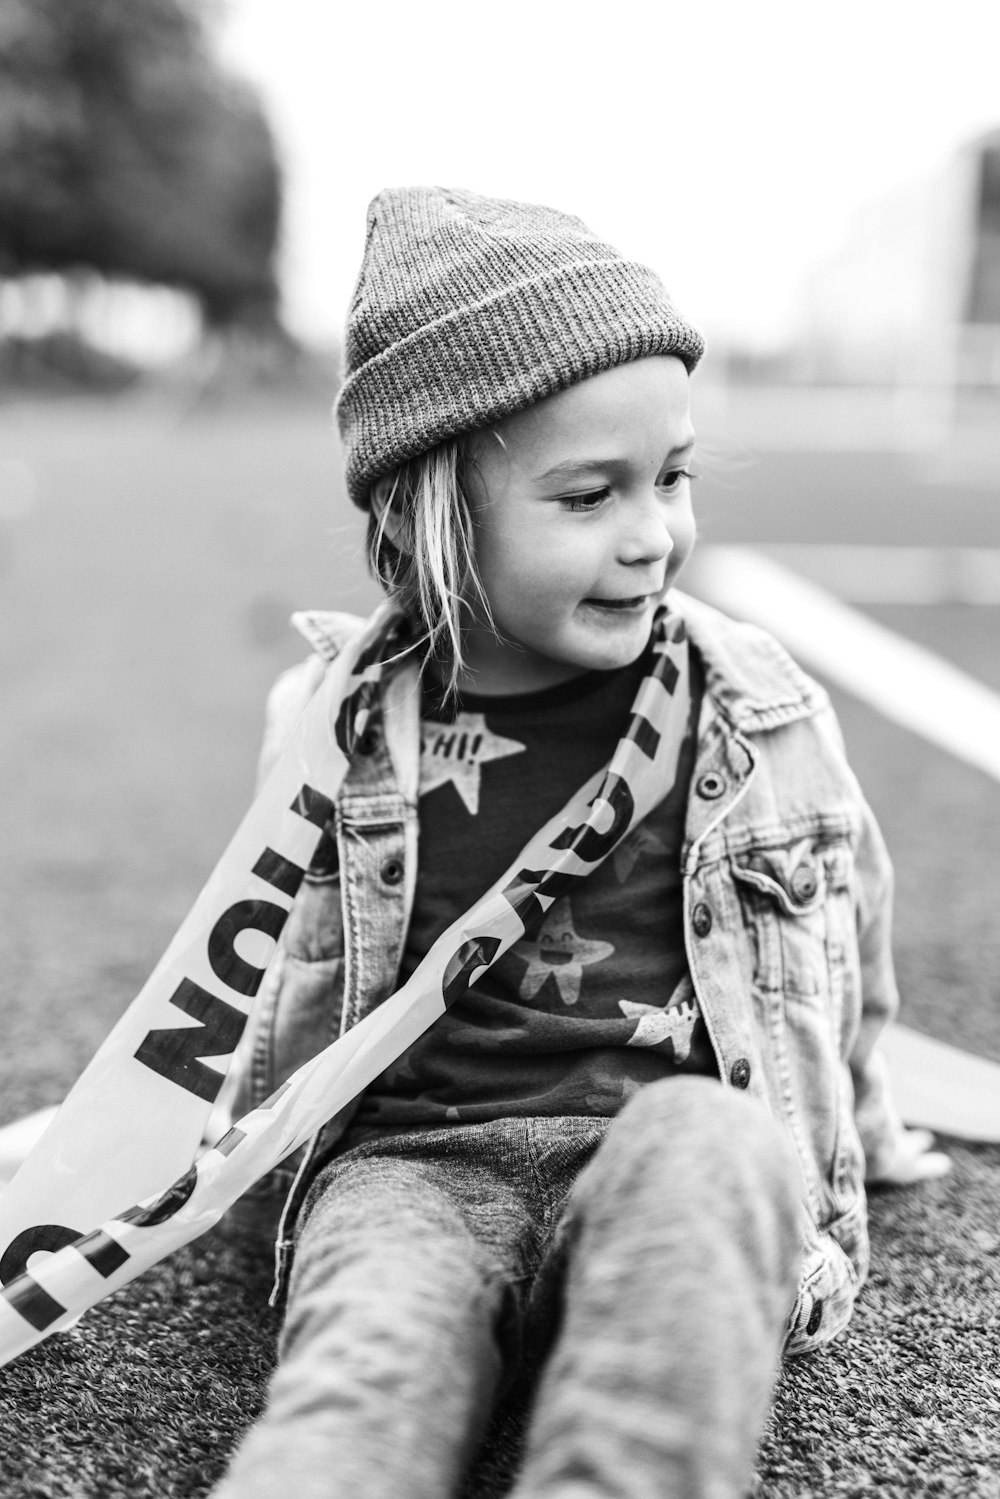 grayscale photo of child wearing knit cap and jacket